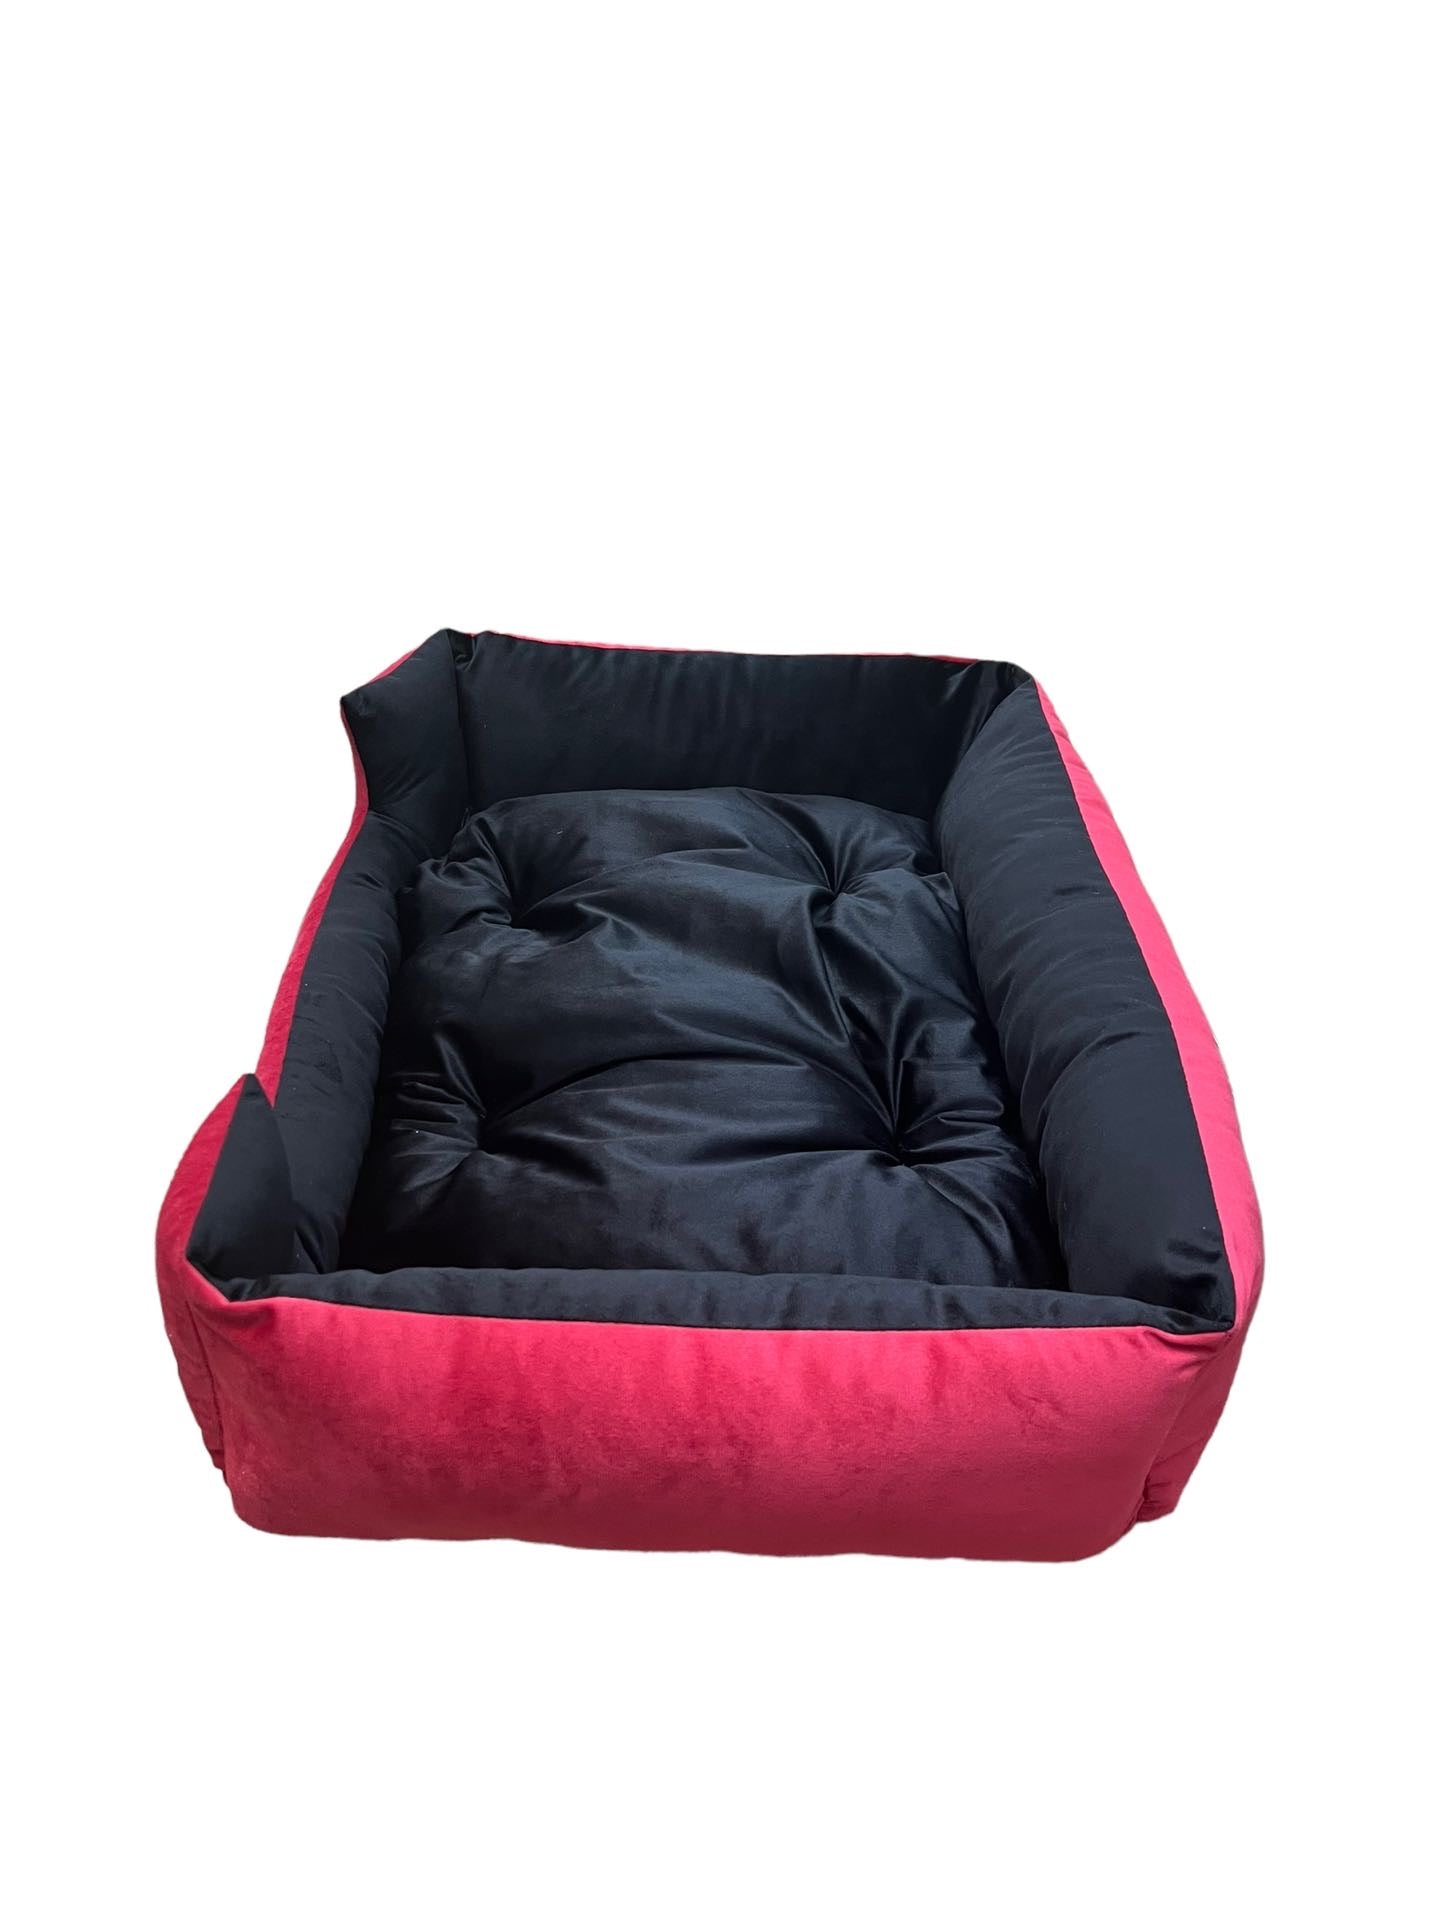 Comfy paw pet bed - XL - For cats & Small breed dogs | Red and Black